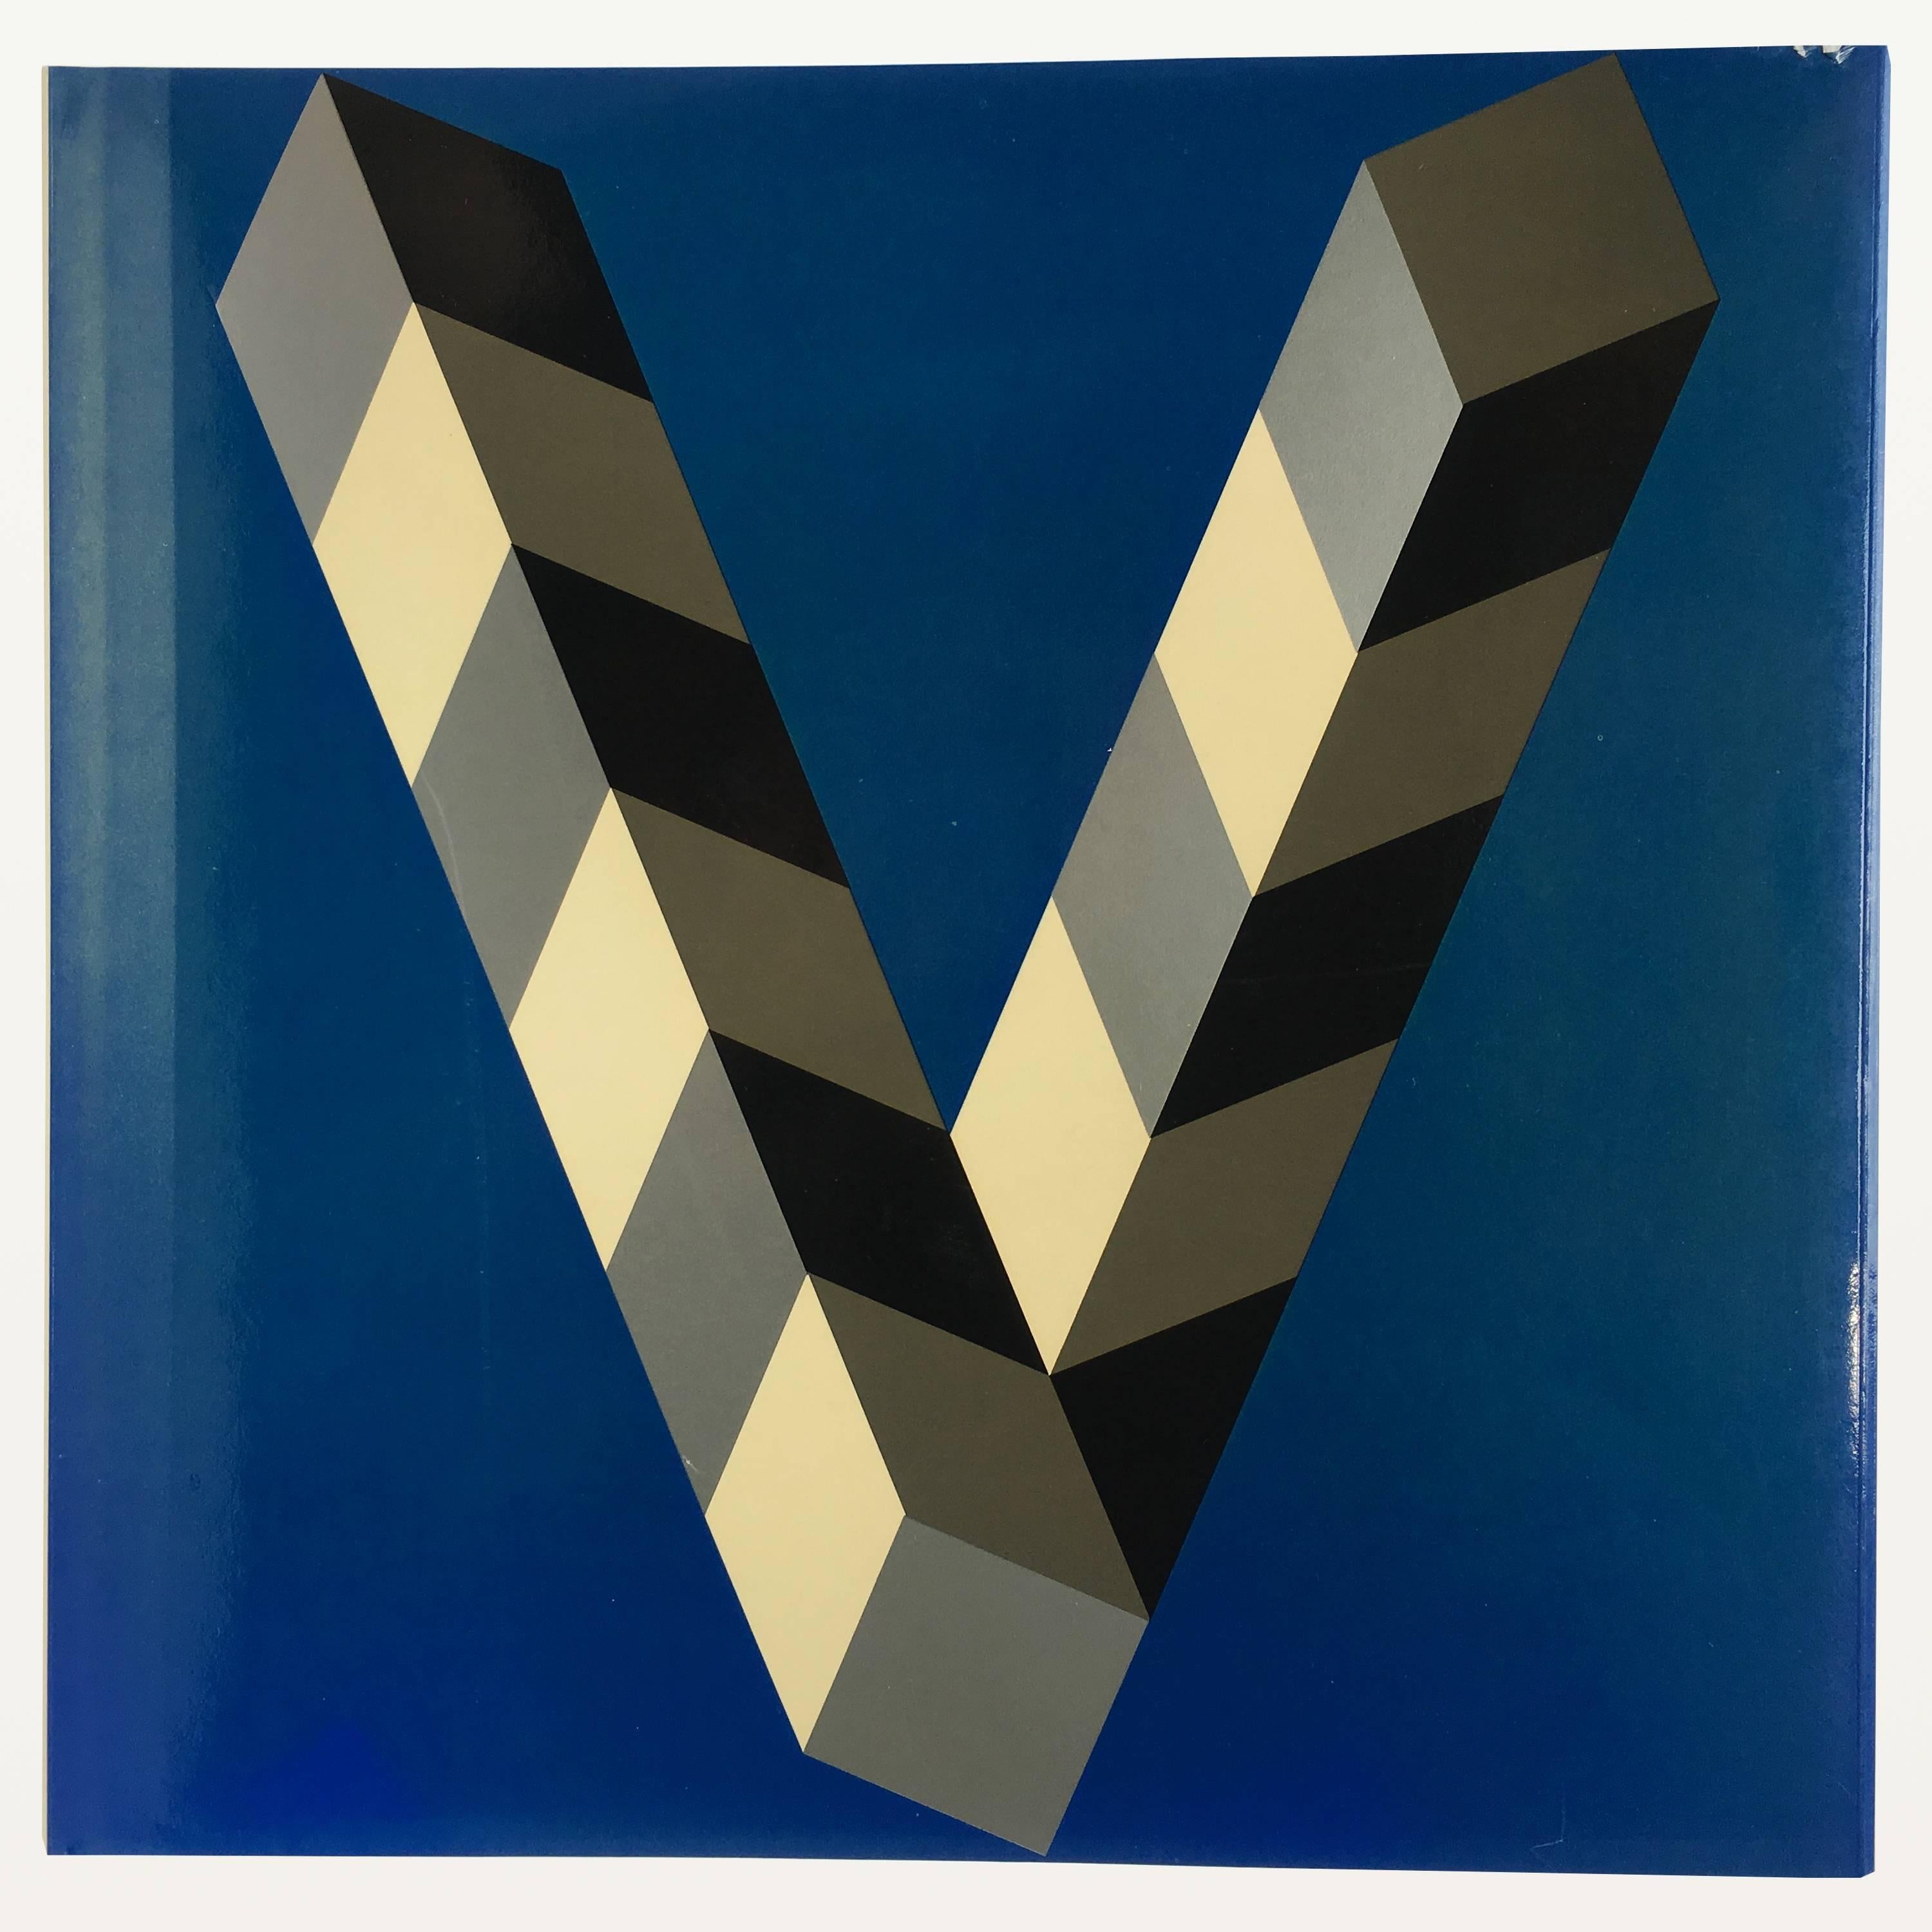 Late 20th Century Vasarely Volumes I, II, III, IV, Victor Vasarely, 1973-1979